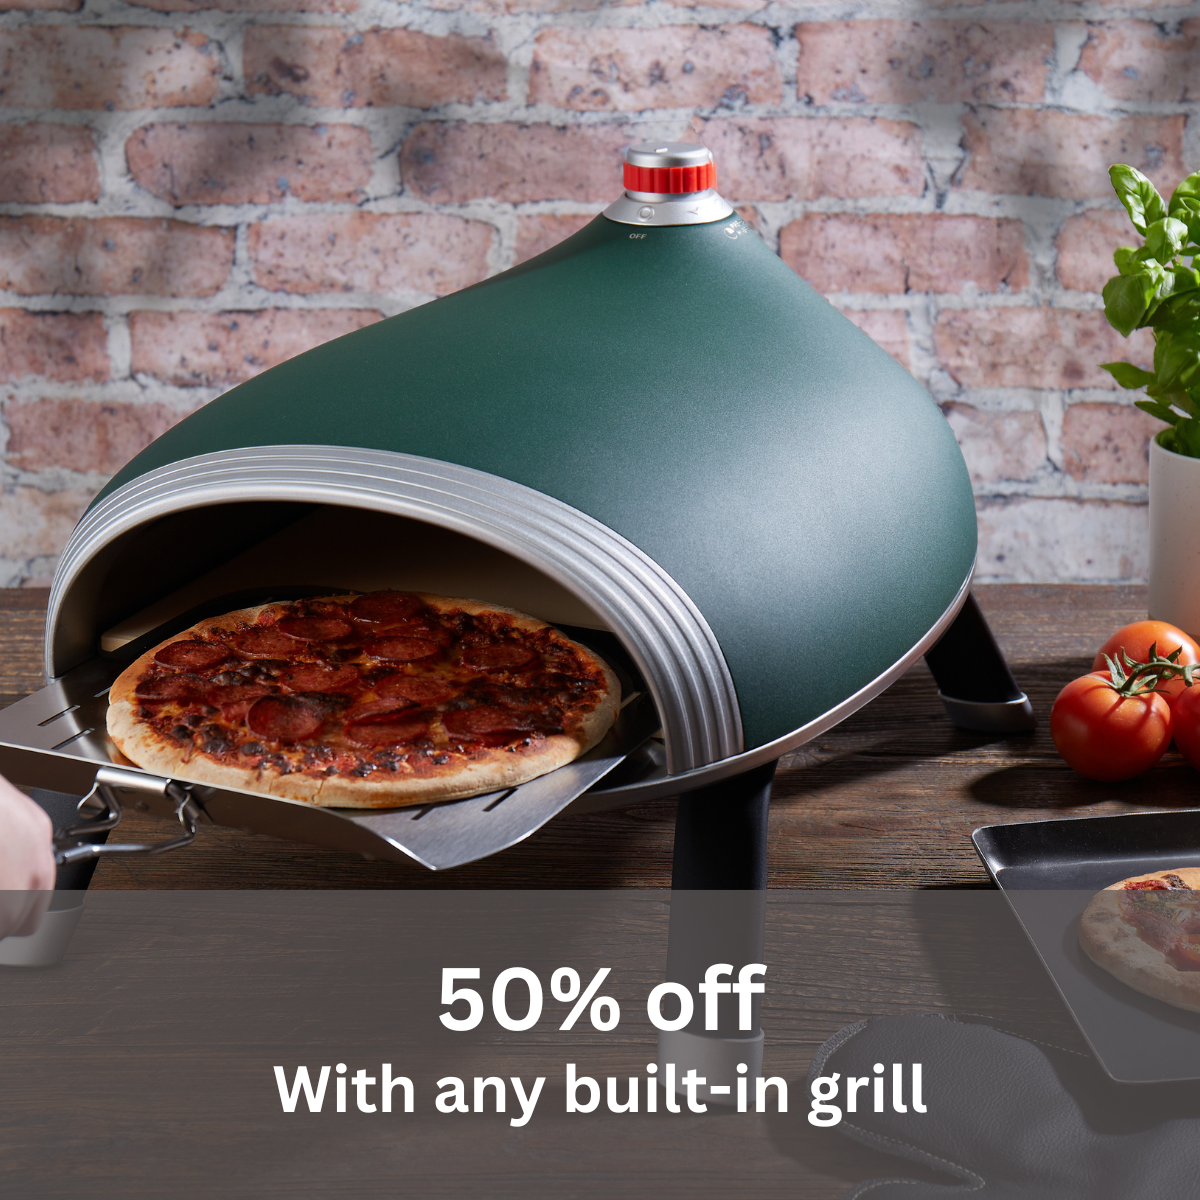 Half price Diavolo pizza oven with any Beefeater or Napoleon built-in grill